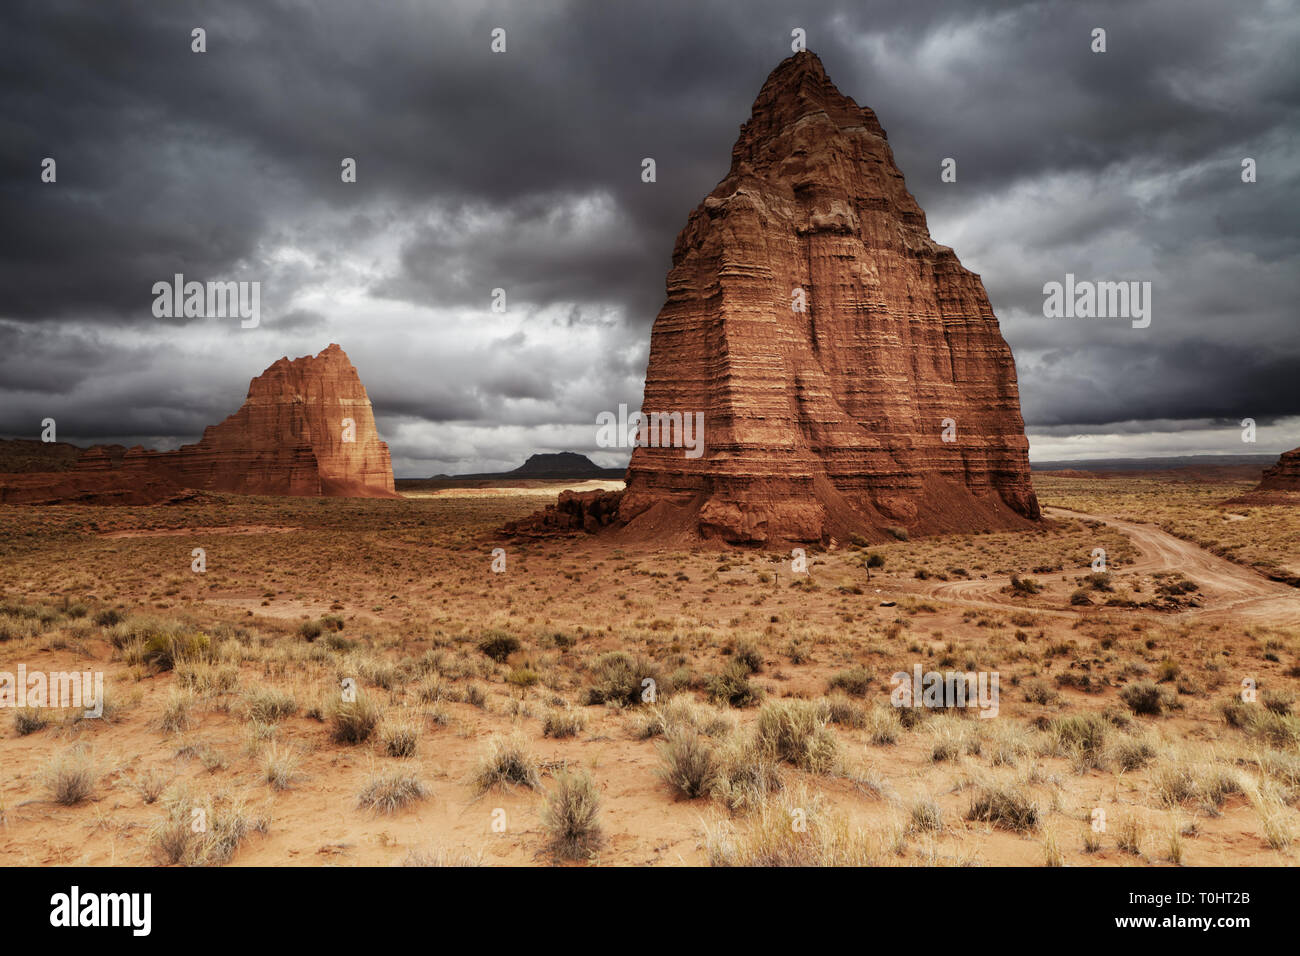 Tempel des Mondes im Cathedral Valley, Capitol Reef National Park, Utah, USA Stockfoto